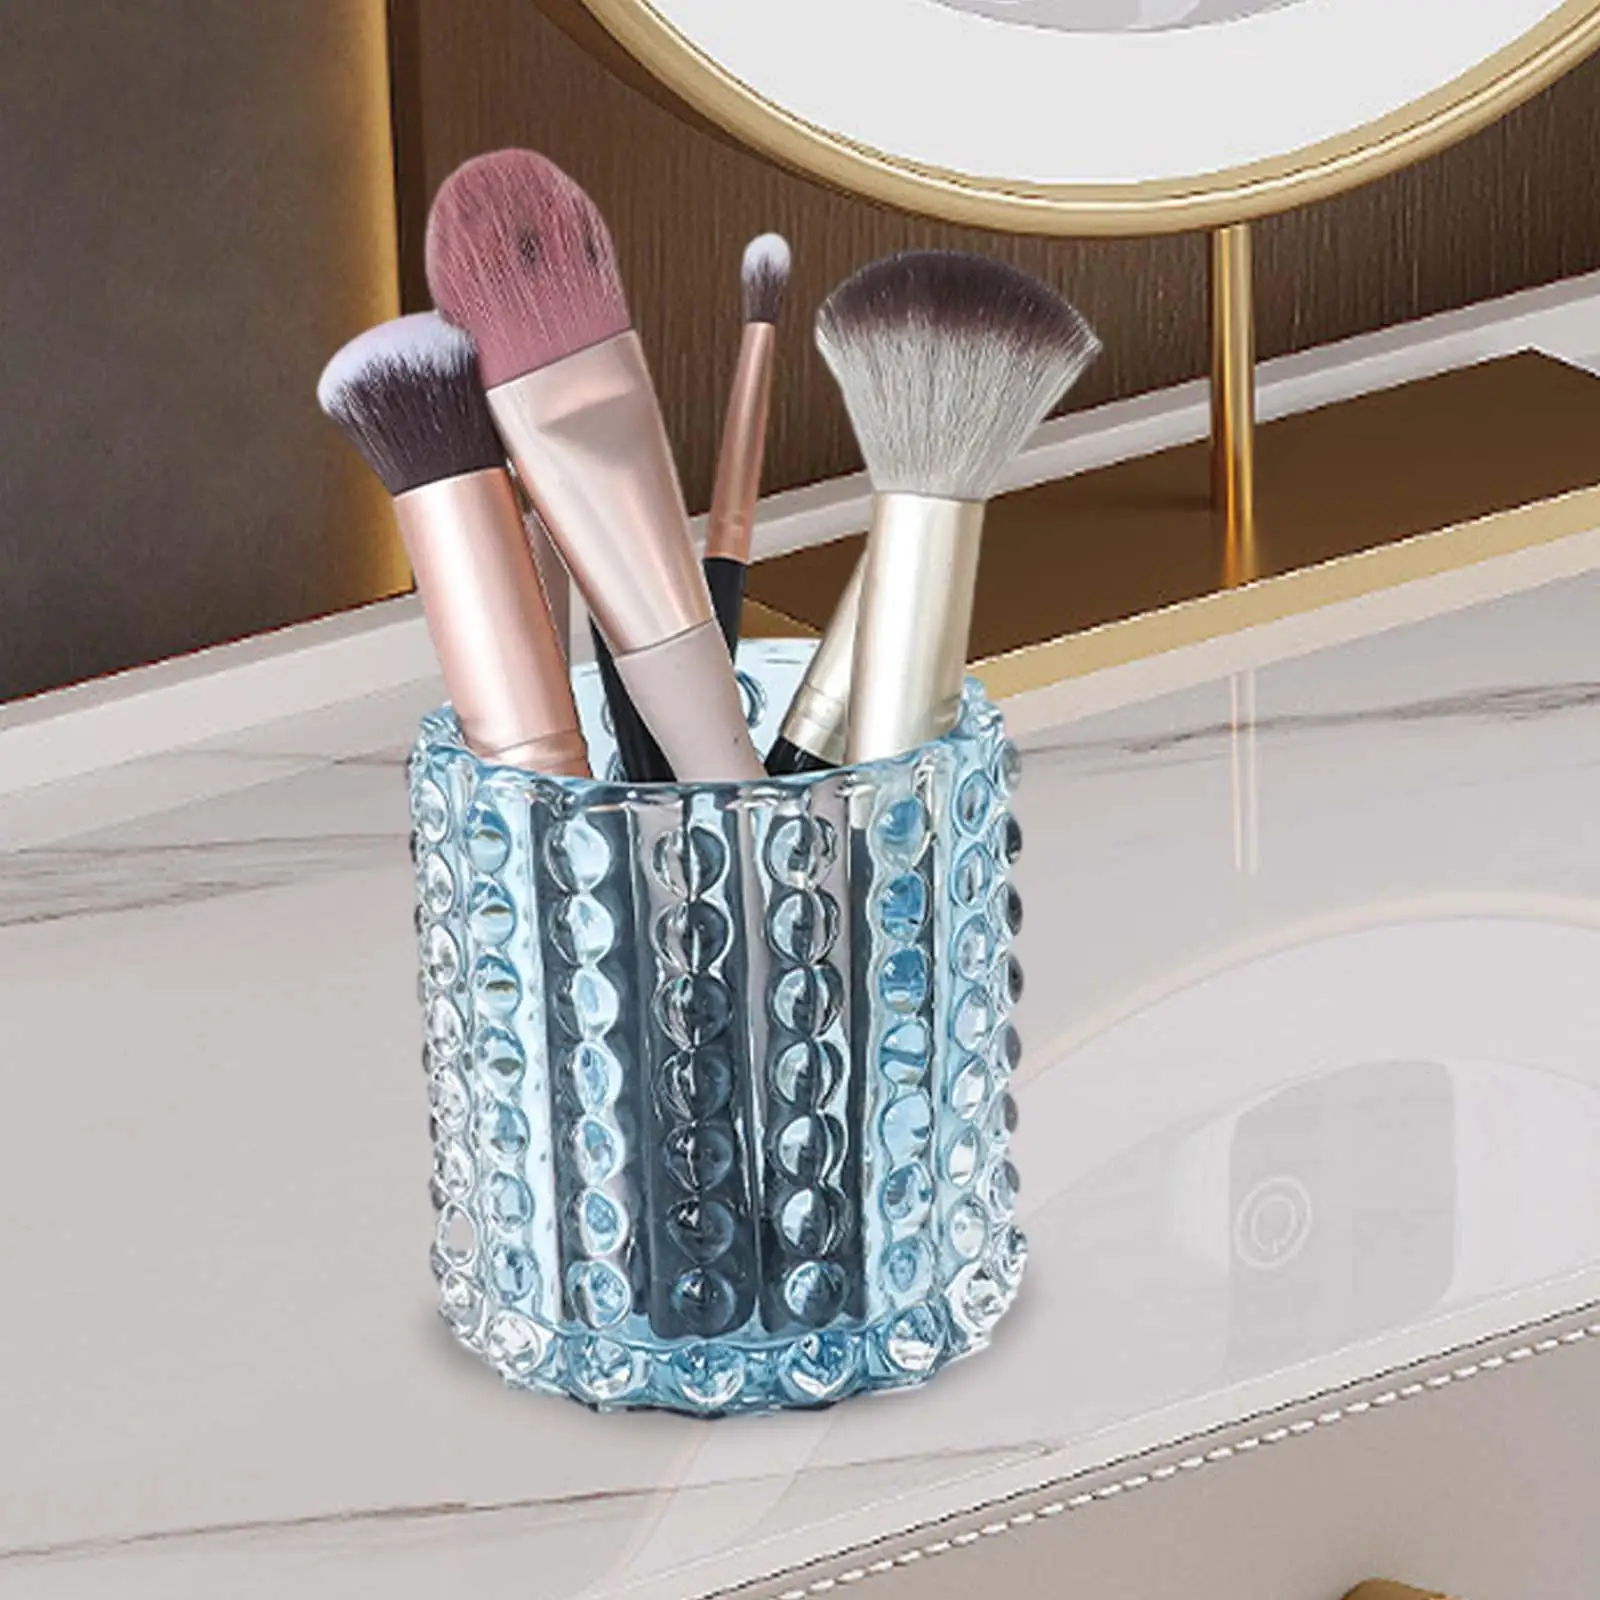 Glass Makeup Brush Holder Portable Paint Brush Container Makeup Organizer Cup for Vanity Office Desk Countertop Bathroom Dresser